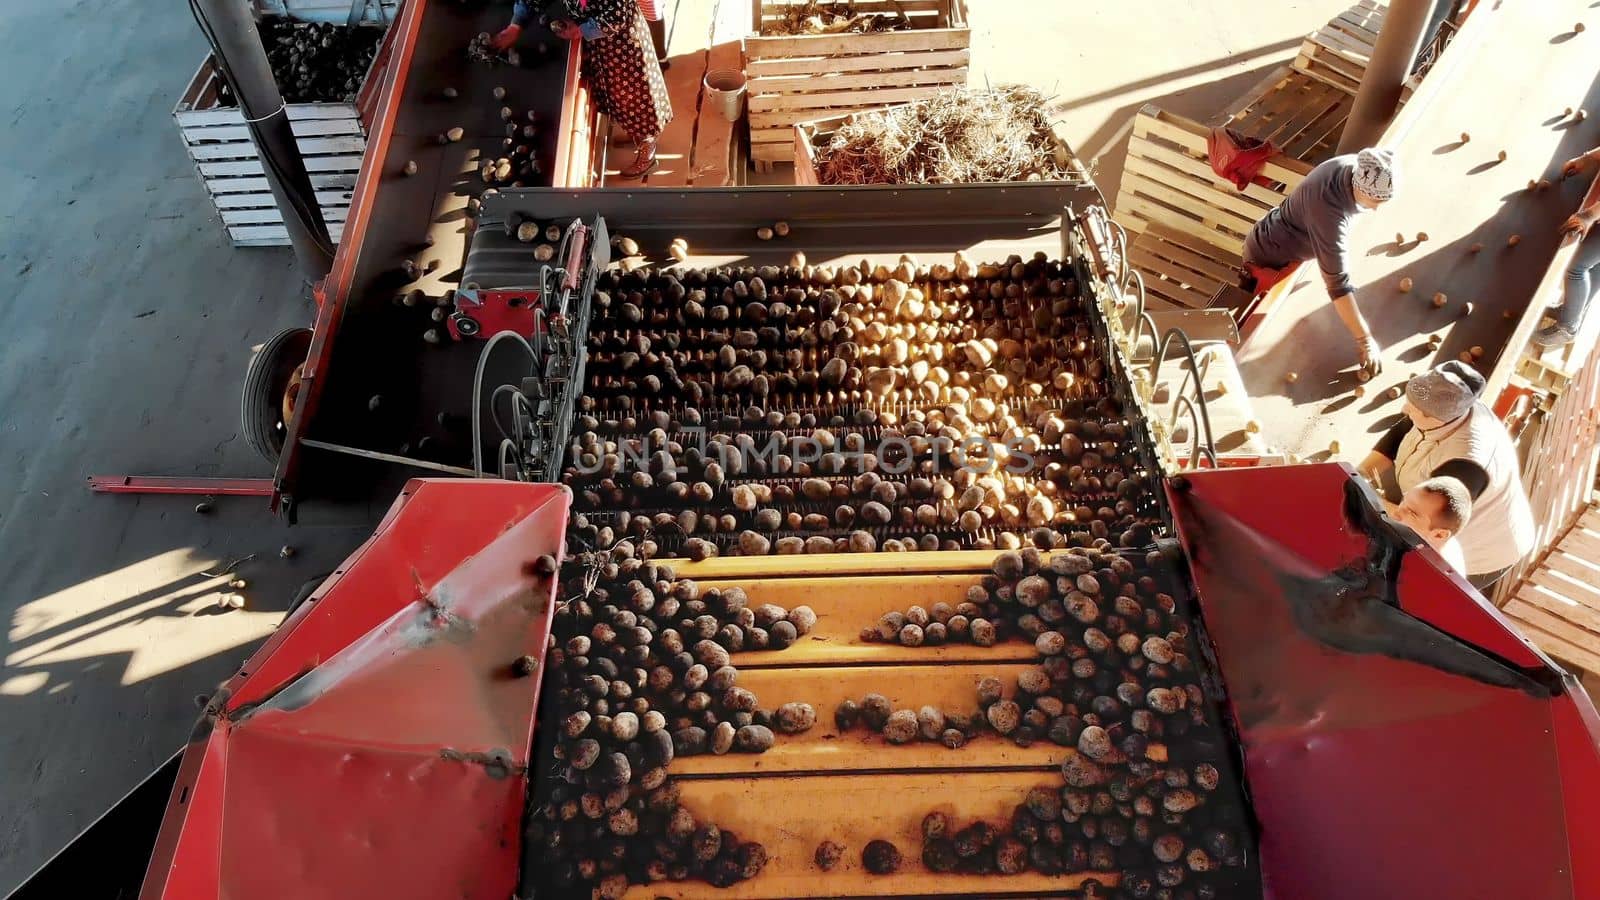 top view. special mechanized process of Potato sorting at farm. potatoes are unloaded on conveyor belt, and workers are sifting potatoes manually. potatoes are put in wooden boxes for packaging. High quality photo